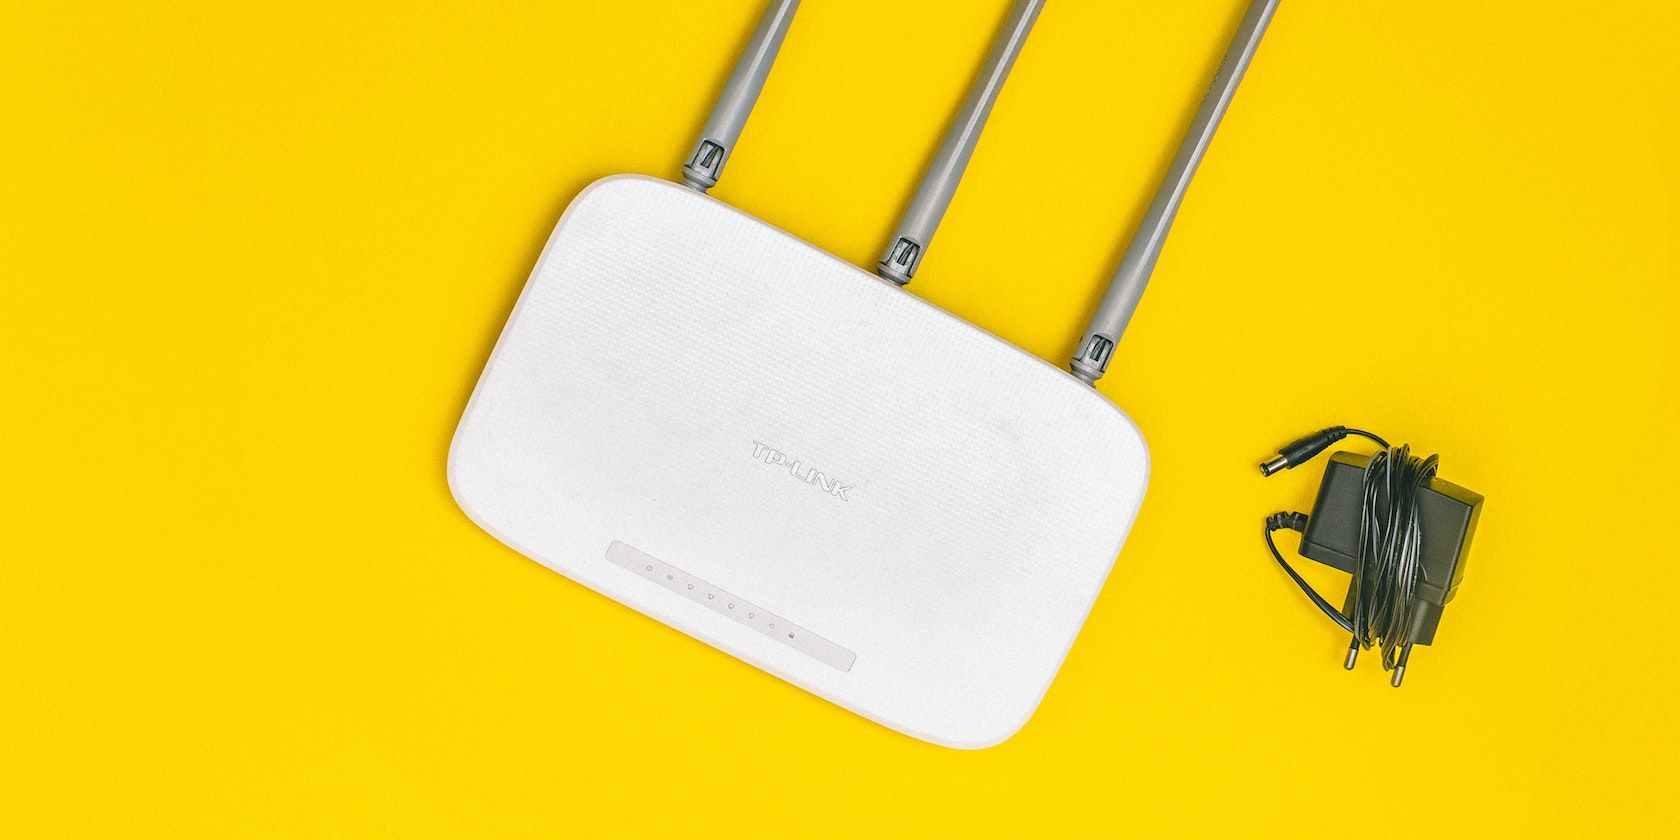 Wi-Fi router and charger on a yellow backgrounhd